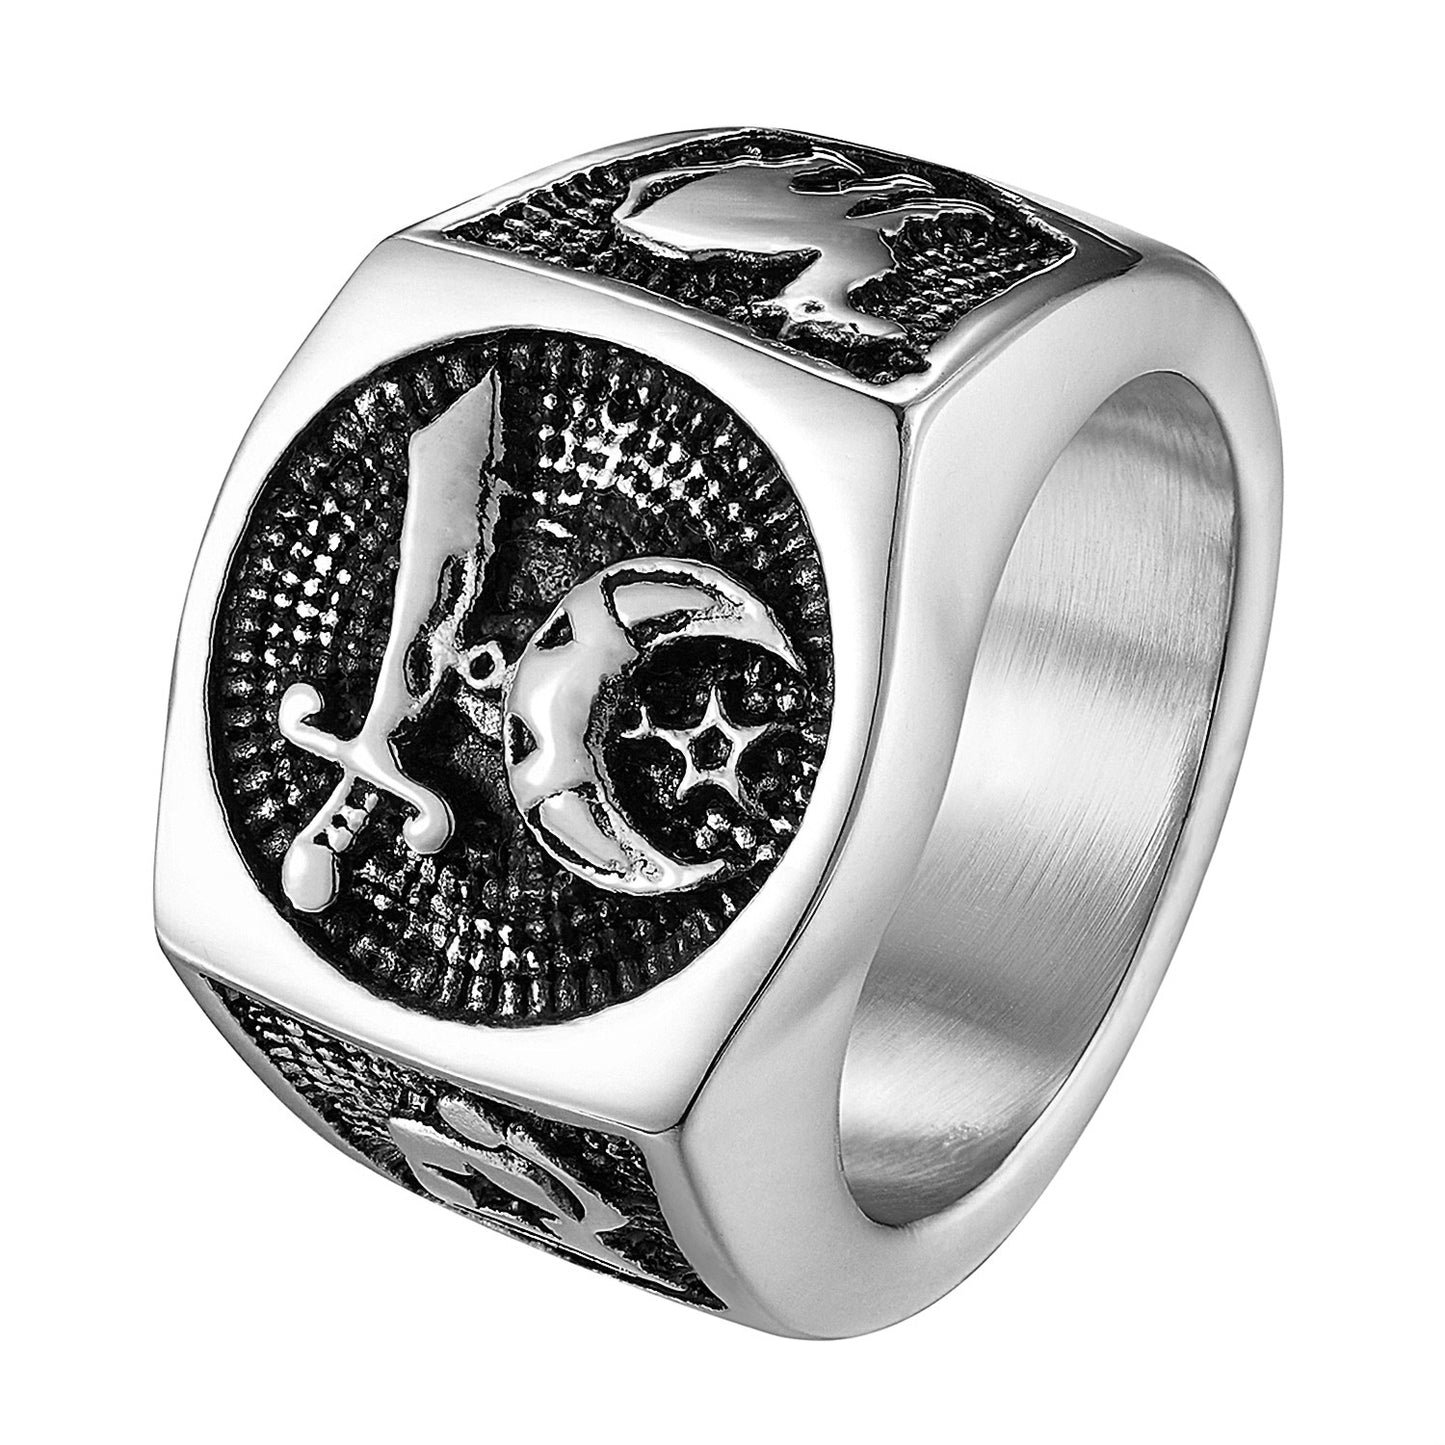 Shriners Mens Ring Mason Religious Stainless Steel Silver Tone